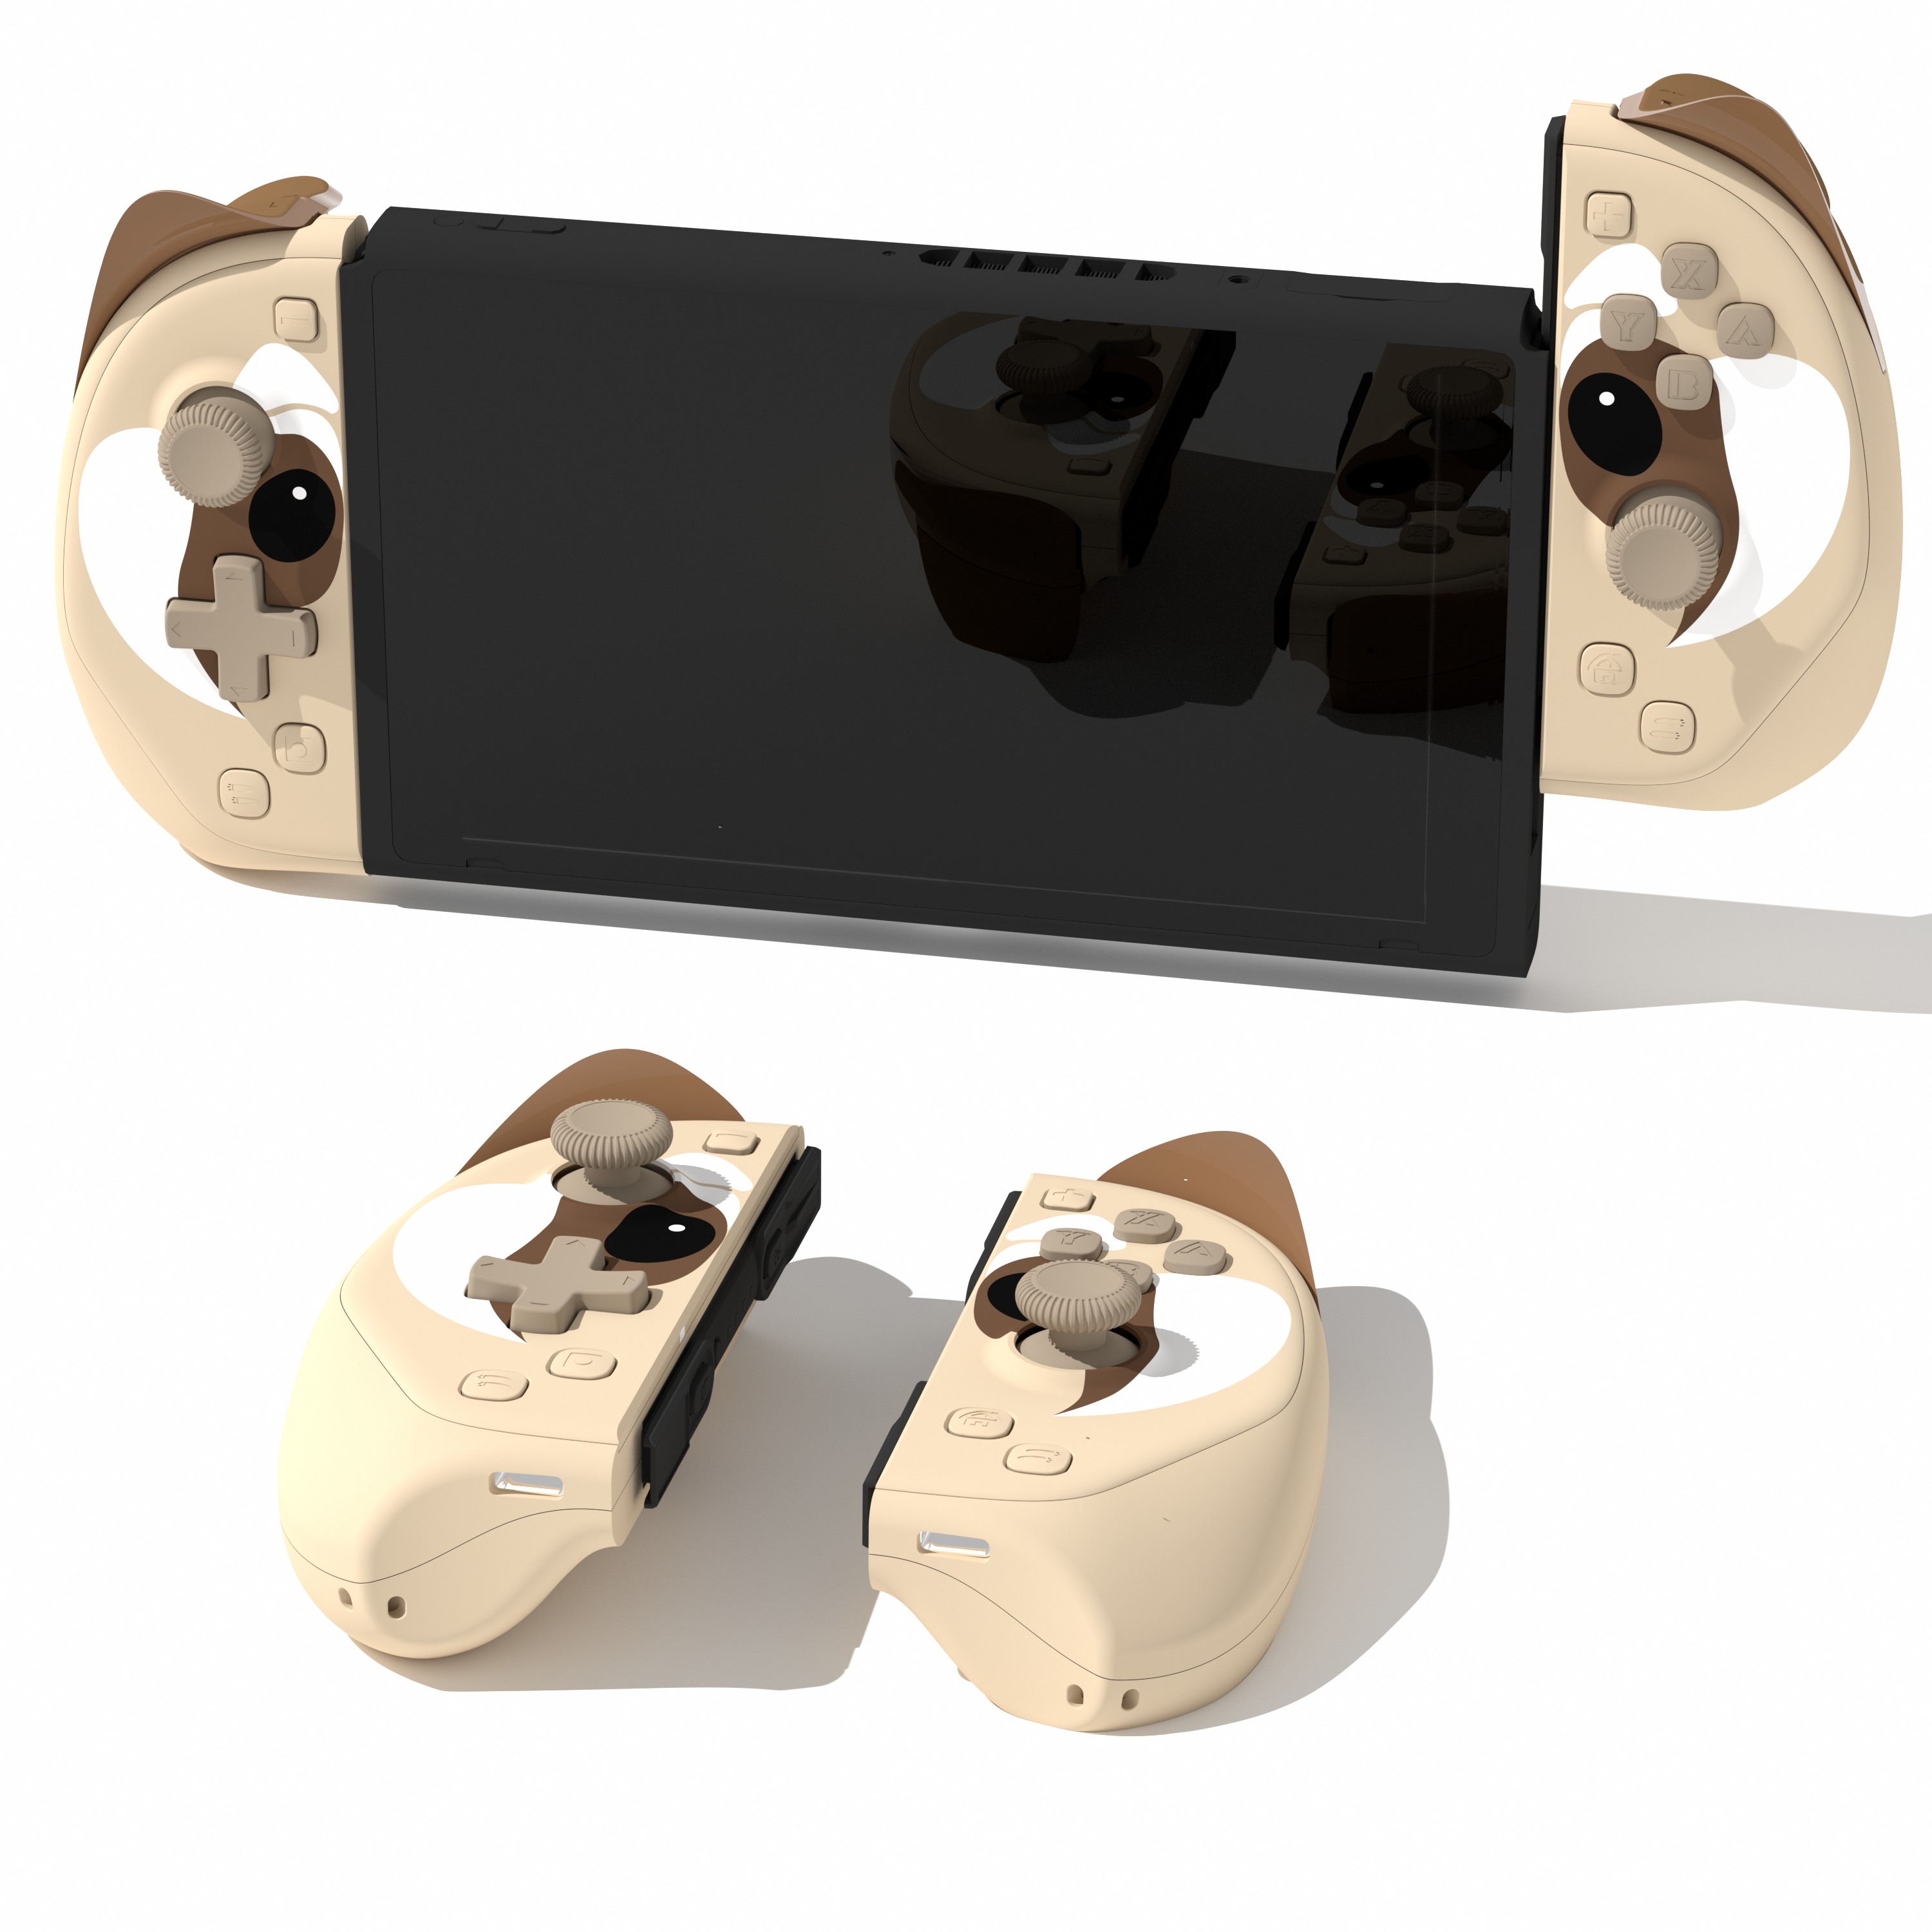 Mytrix Brownie - JoyPad for Nintendo Switch, the Newest Switch OLED, and Switch Lite